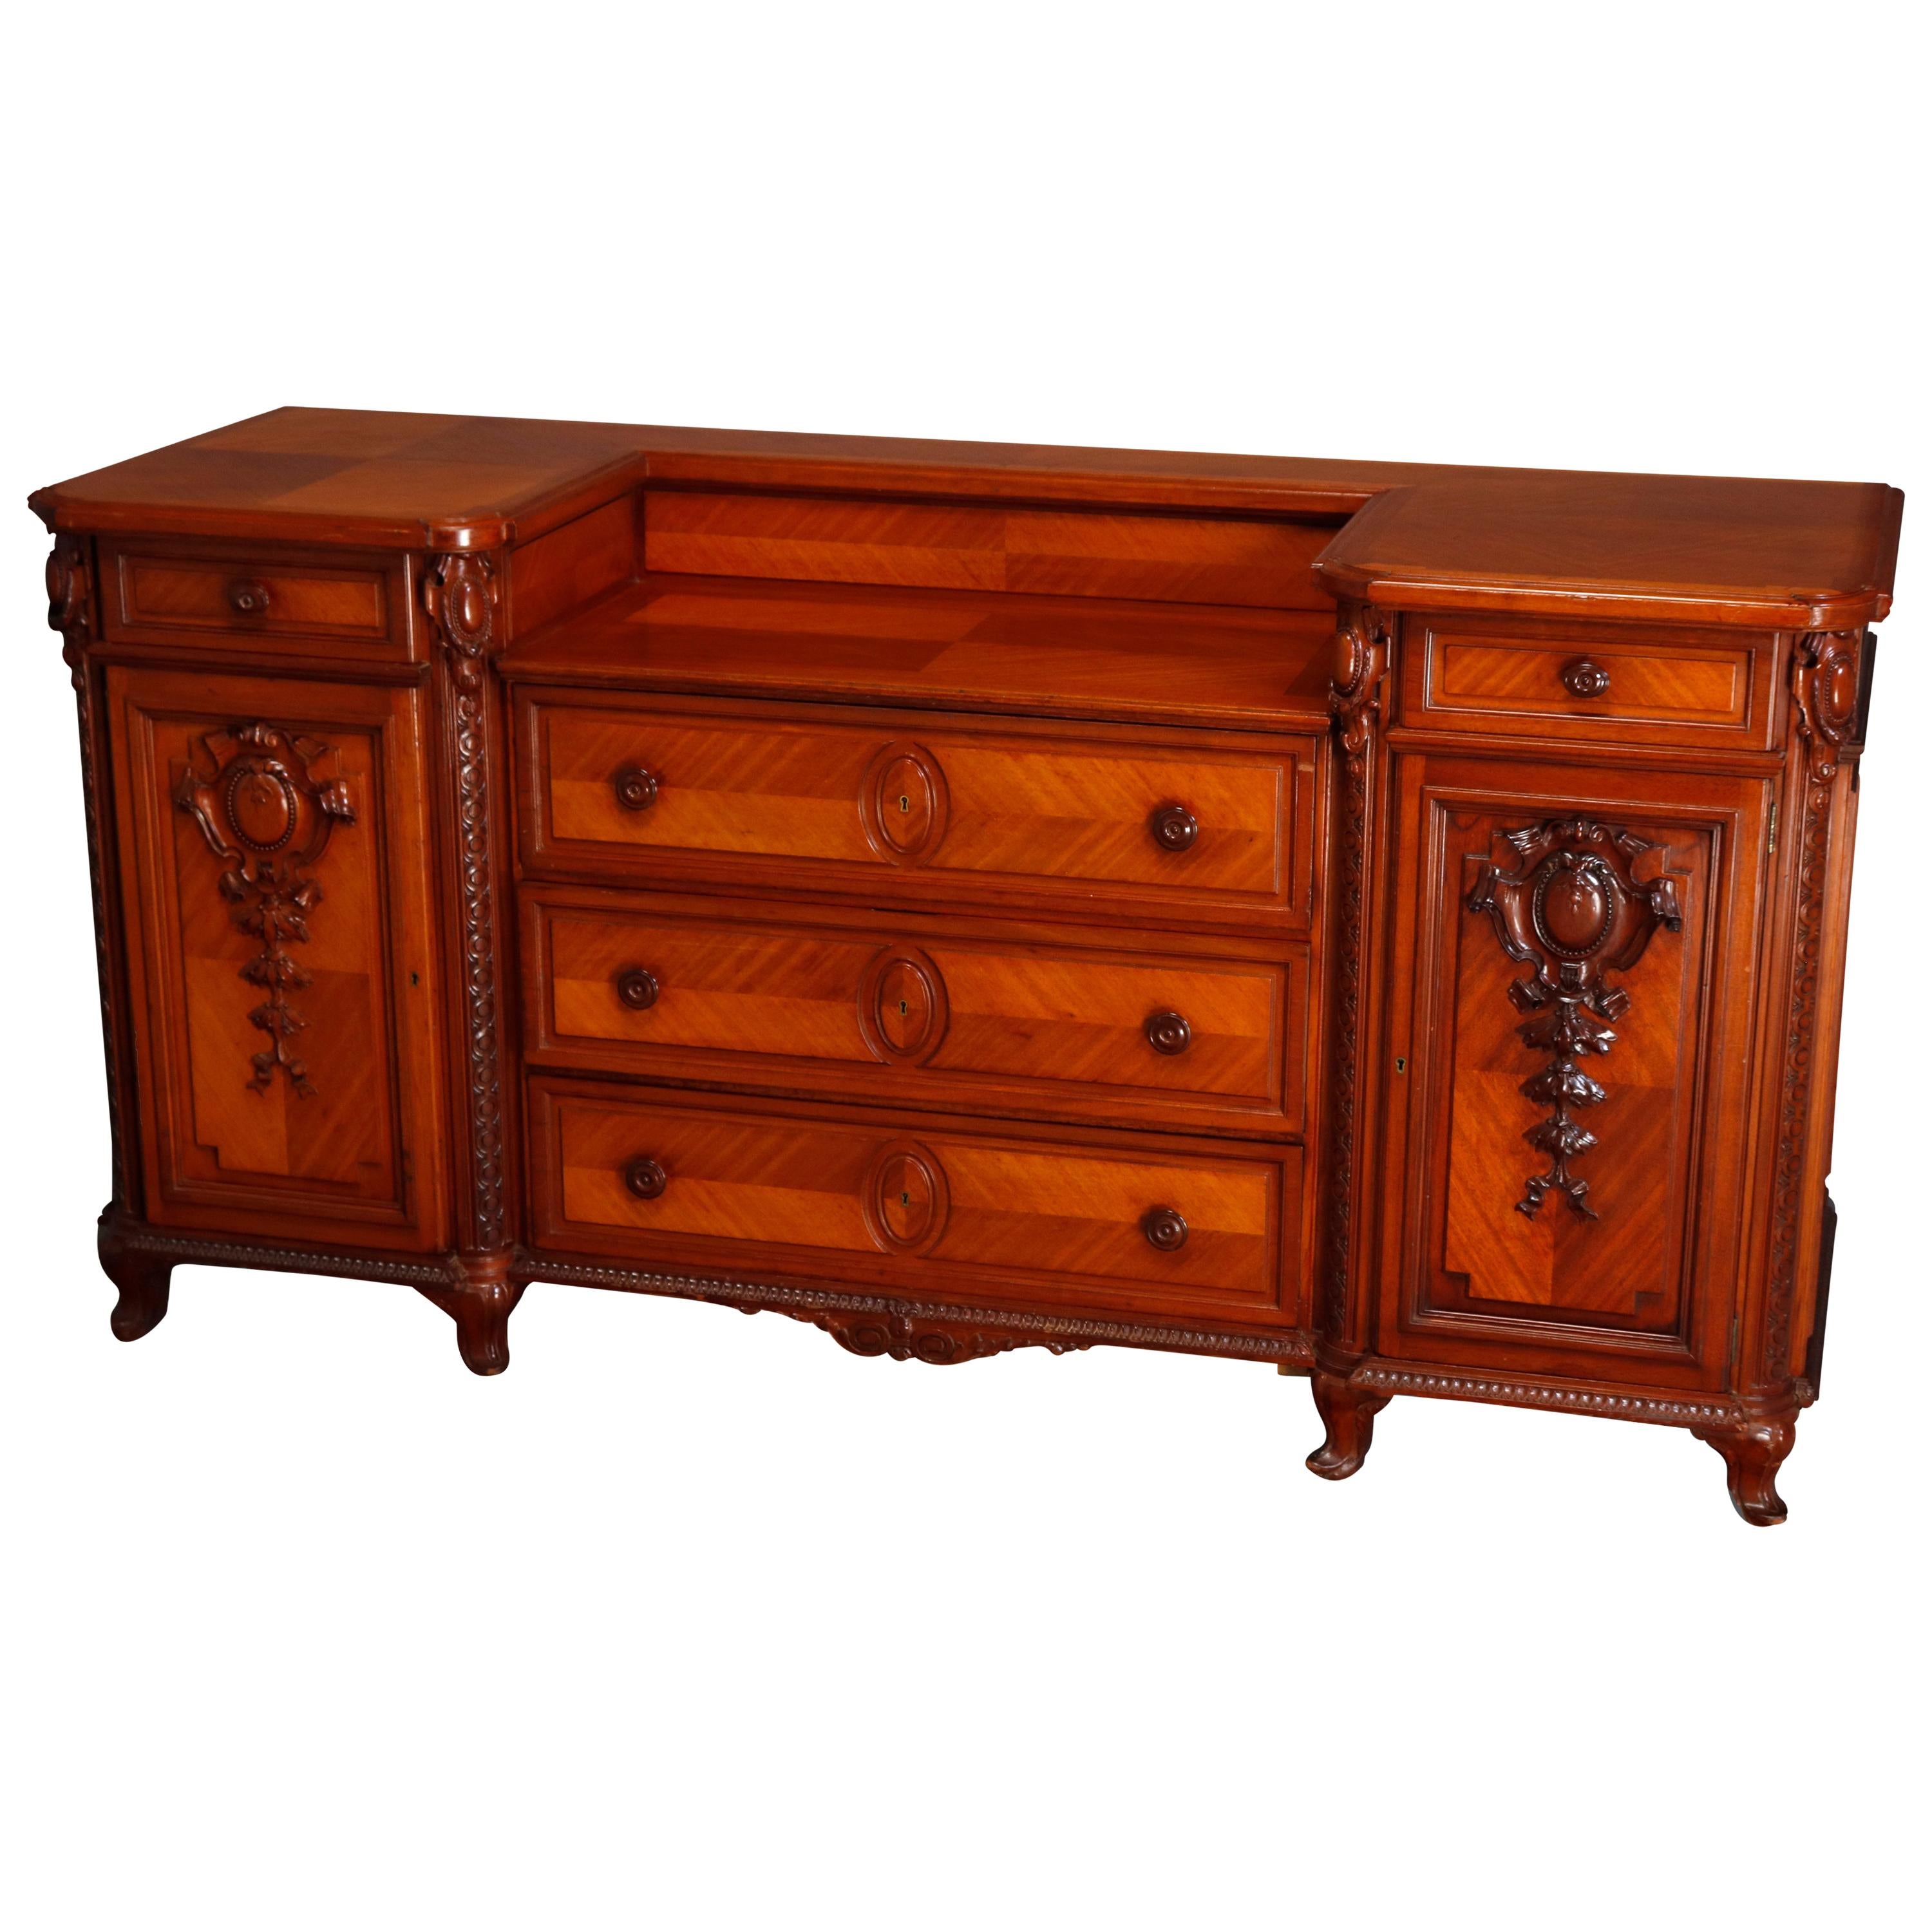 Vintage French Carved Mahogany & Satinwood Inlaid Drop Center Sideboard